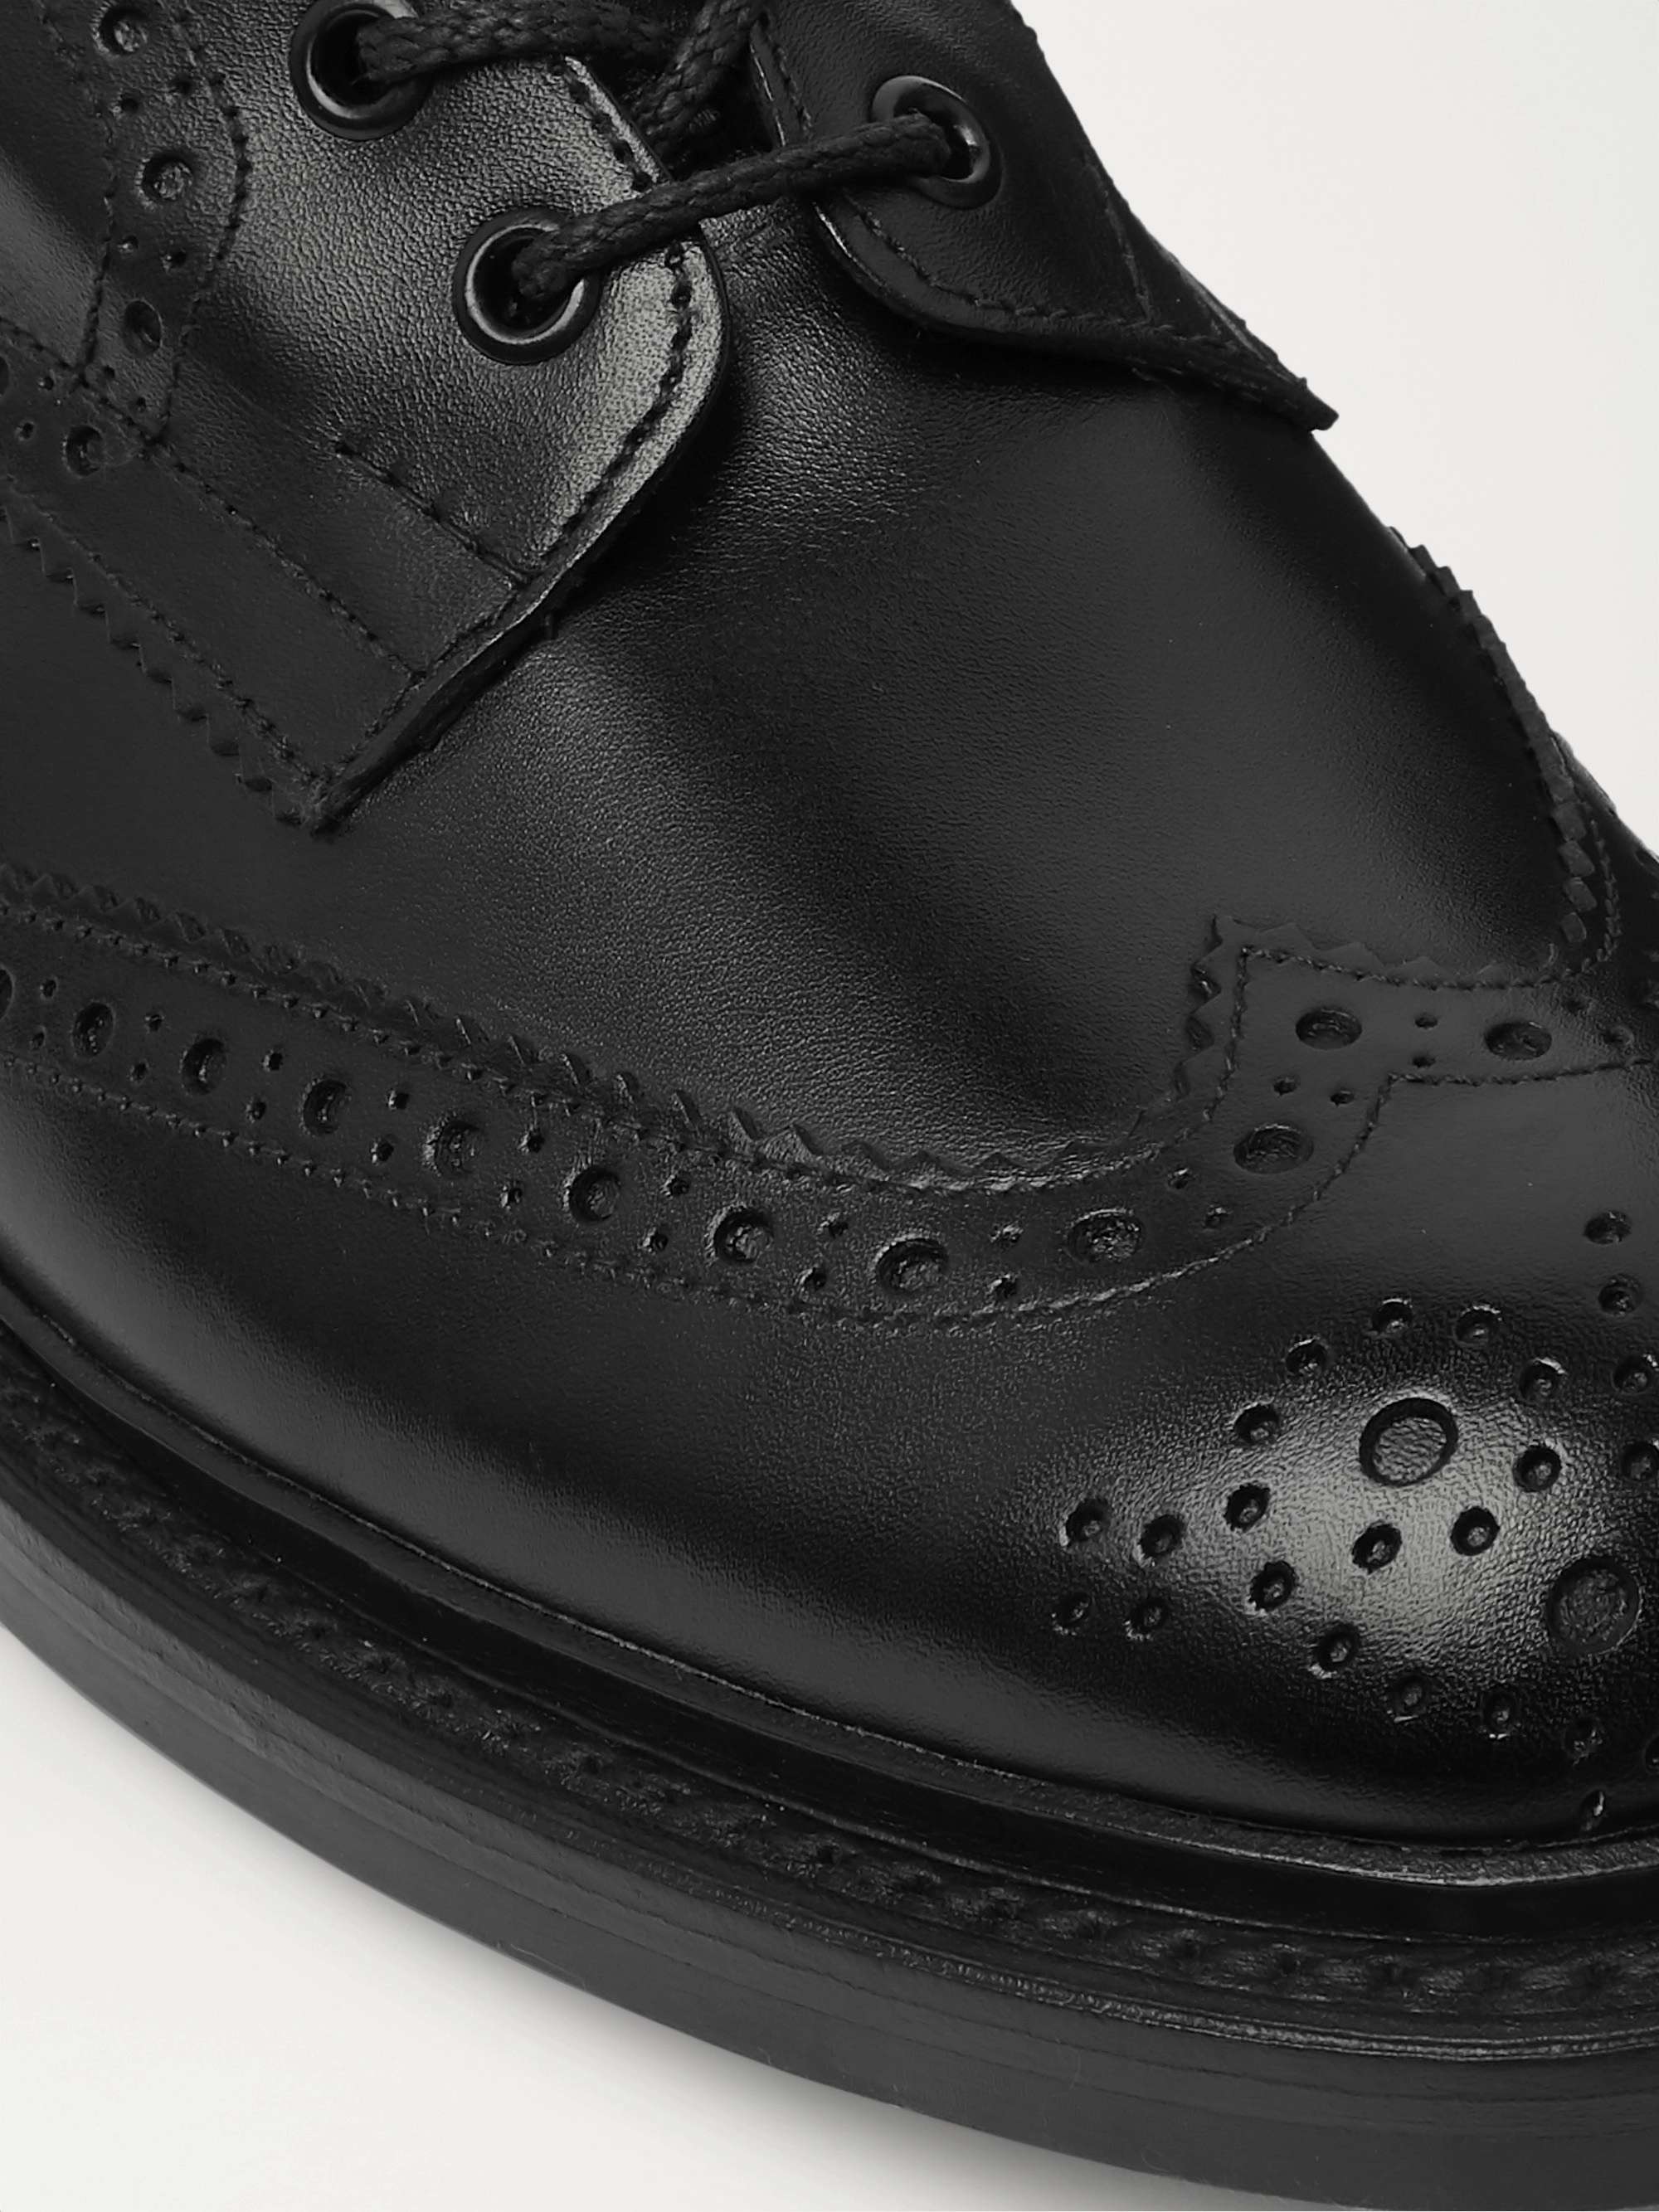 Black Stow Full-Grain Leather Brogue Boots | TRICKER'S | MR PORTER